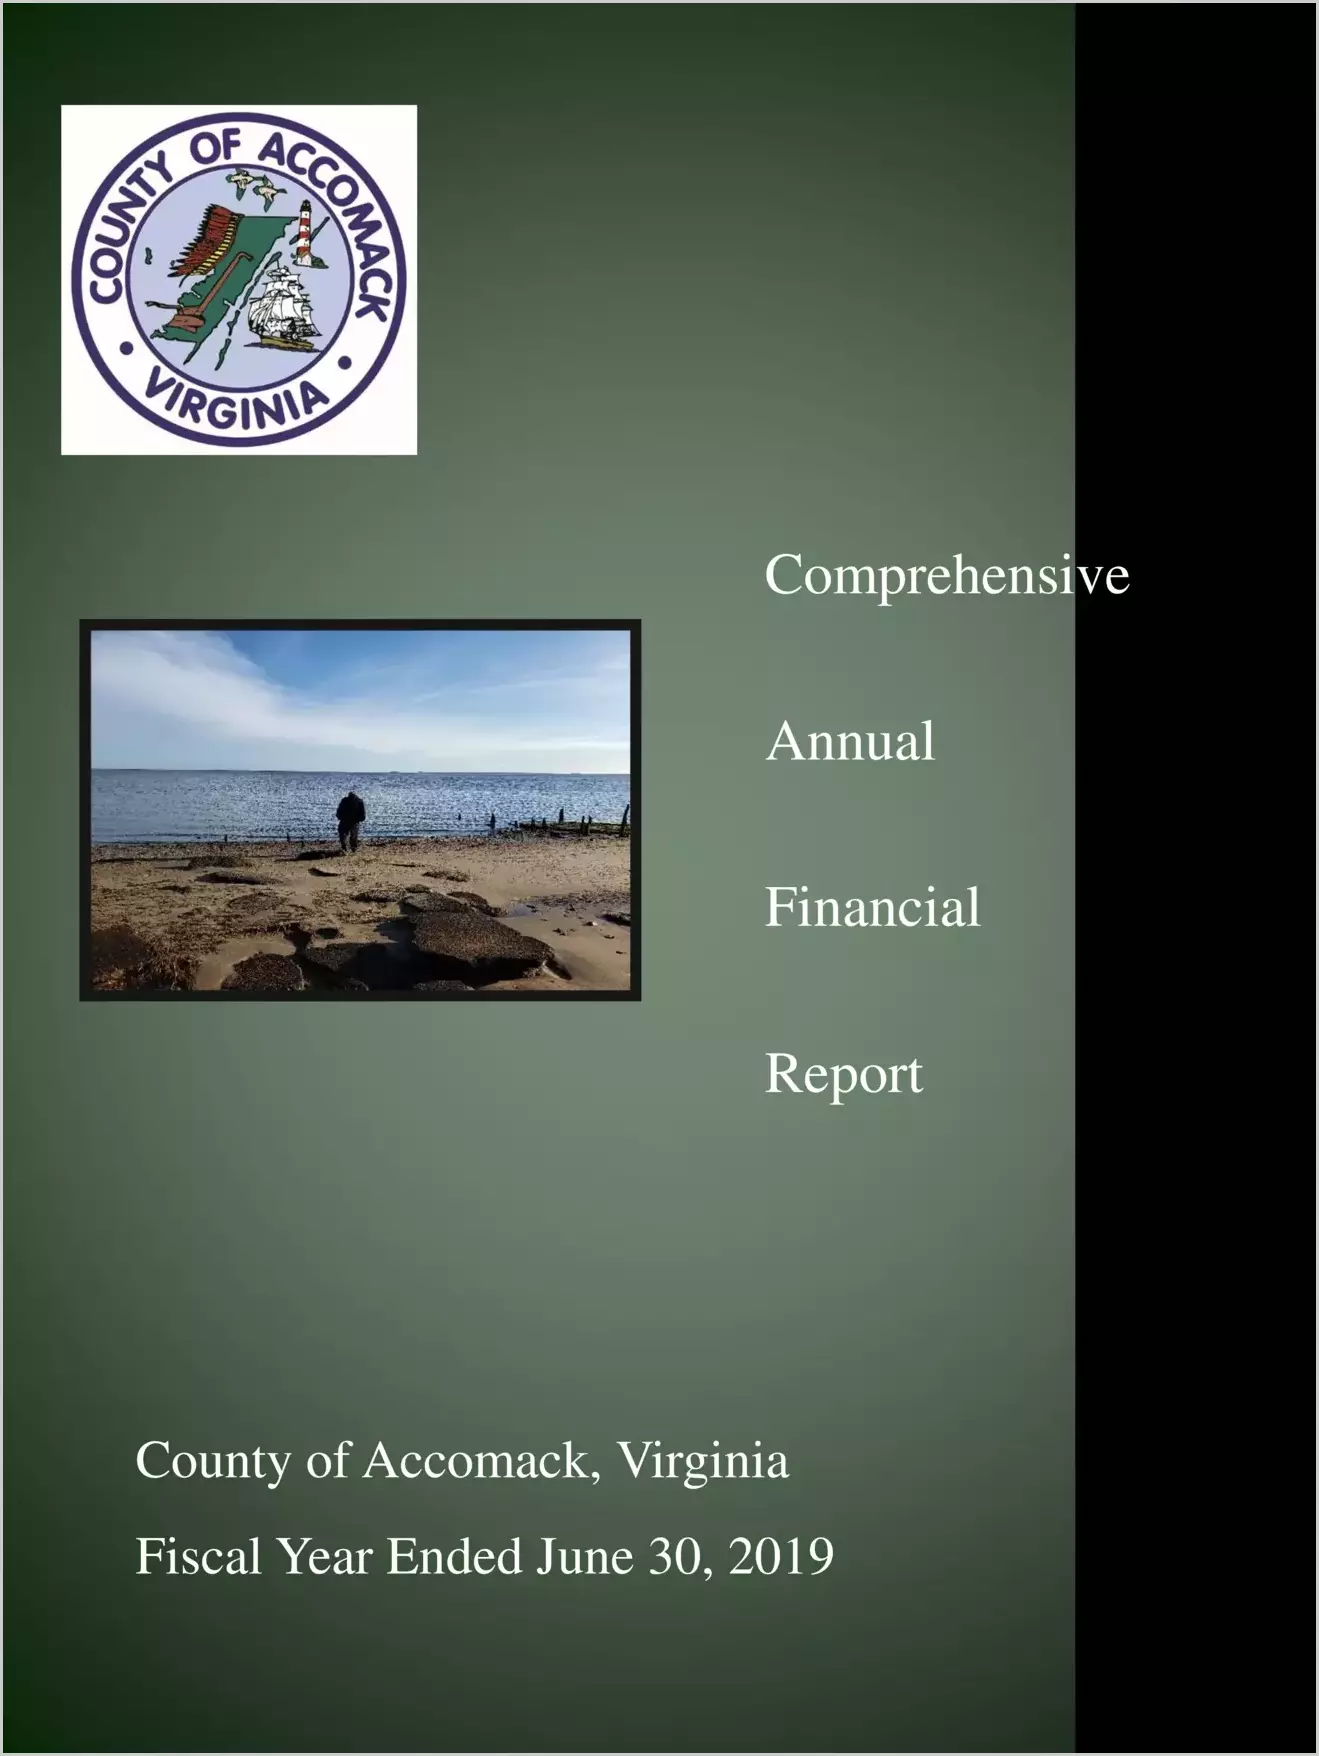 2019 Annual Financial Report for County of Accomack